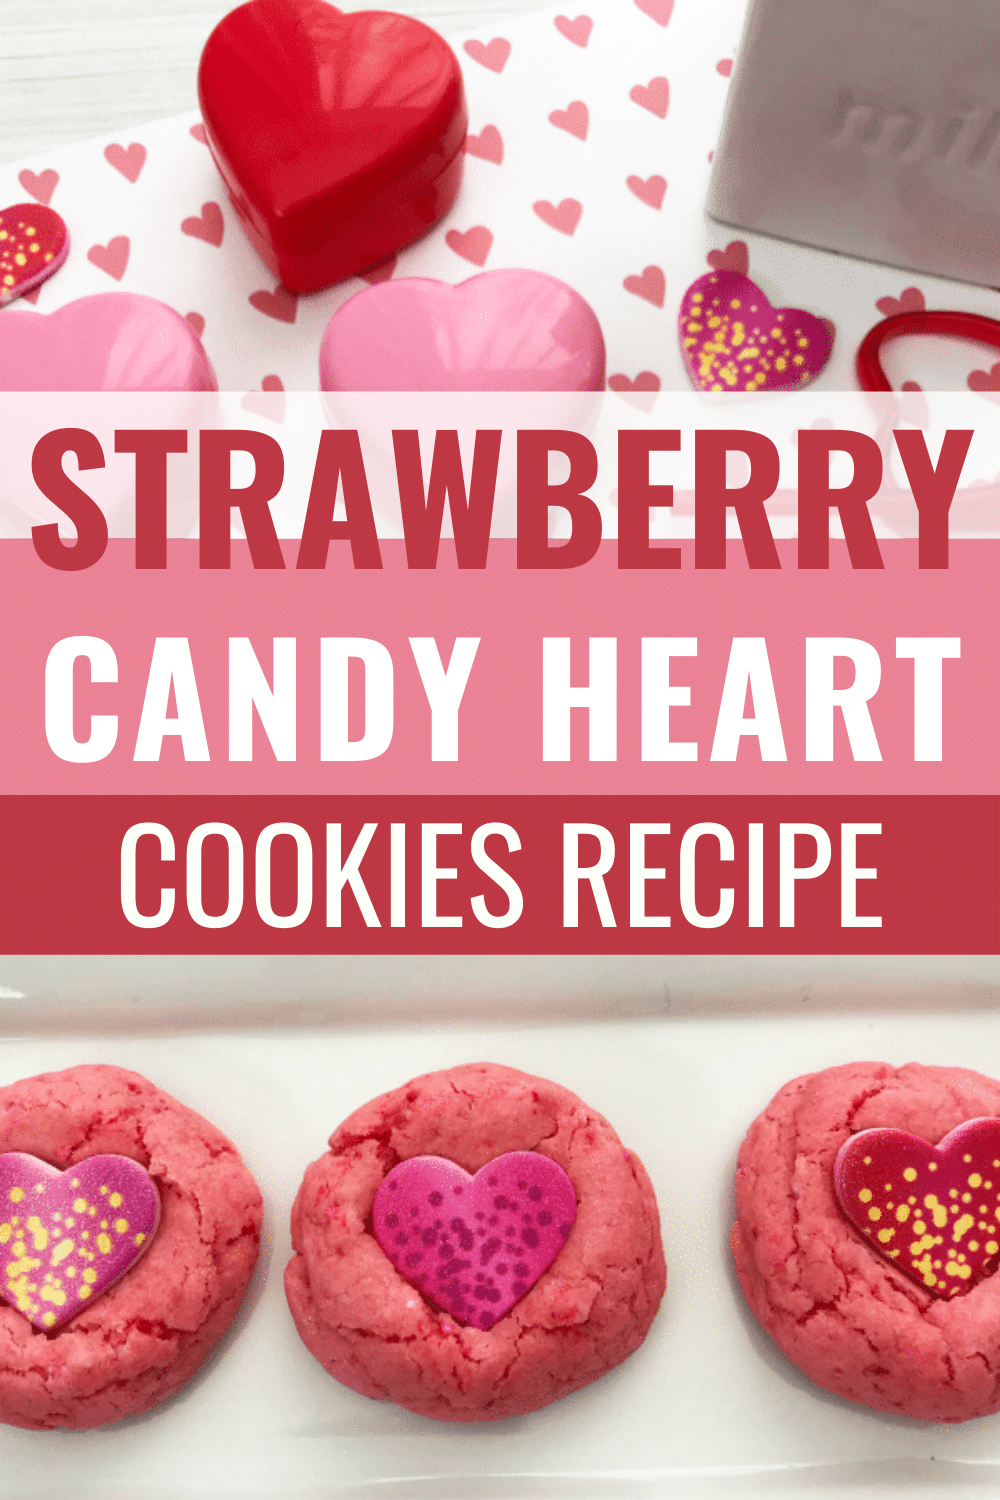 Strawberry Candy Heart Cookies are the perfect treat for Valentine's Day. This is also a simple cookie recipe made with a cake mix. #cookies #ValentinesDay #strawberry via @wondermomwannab